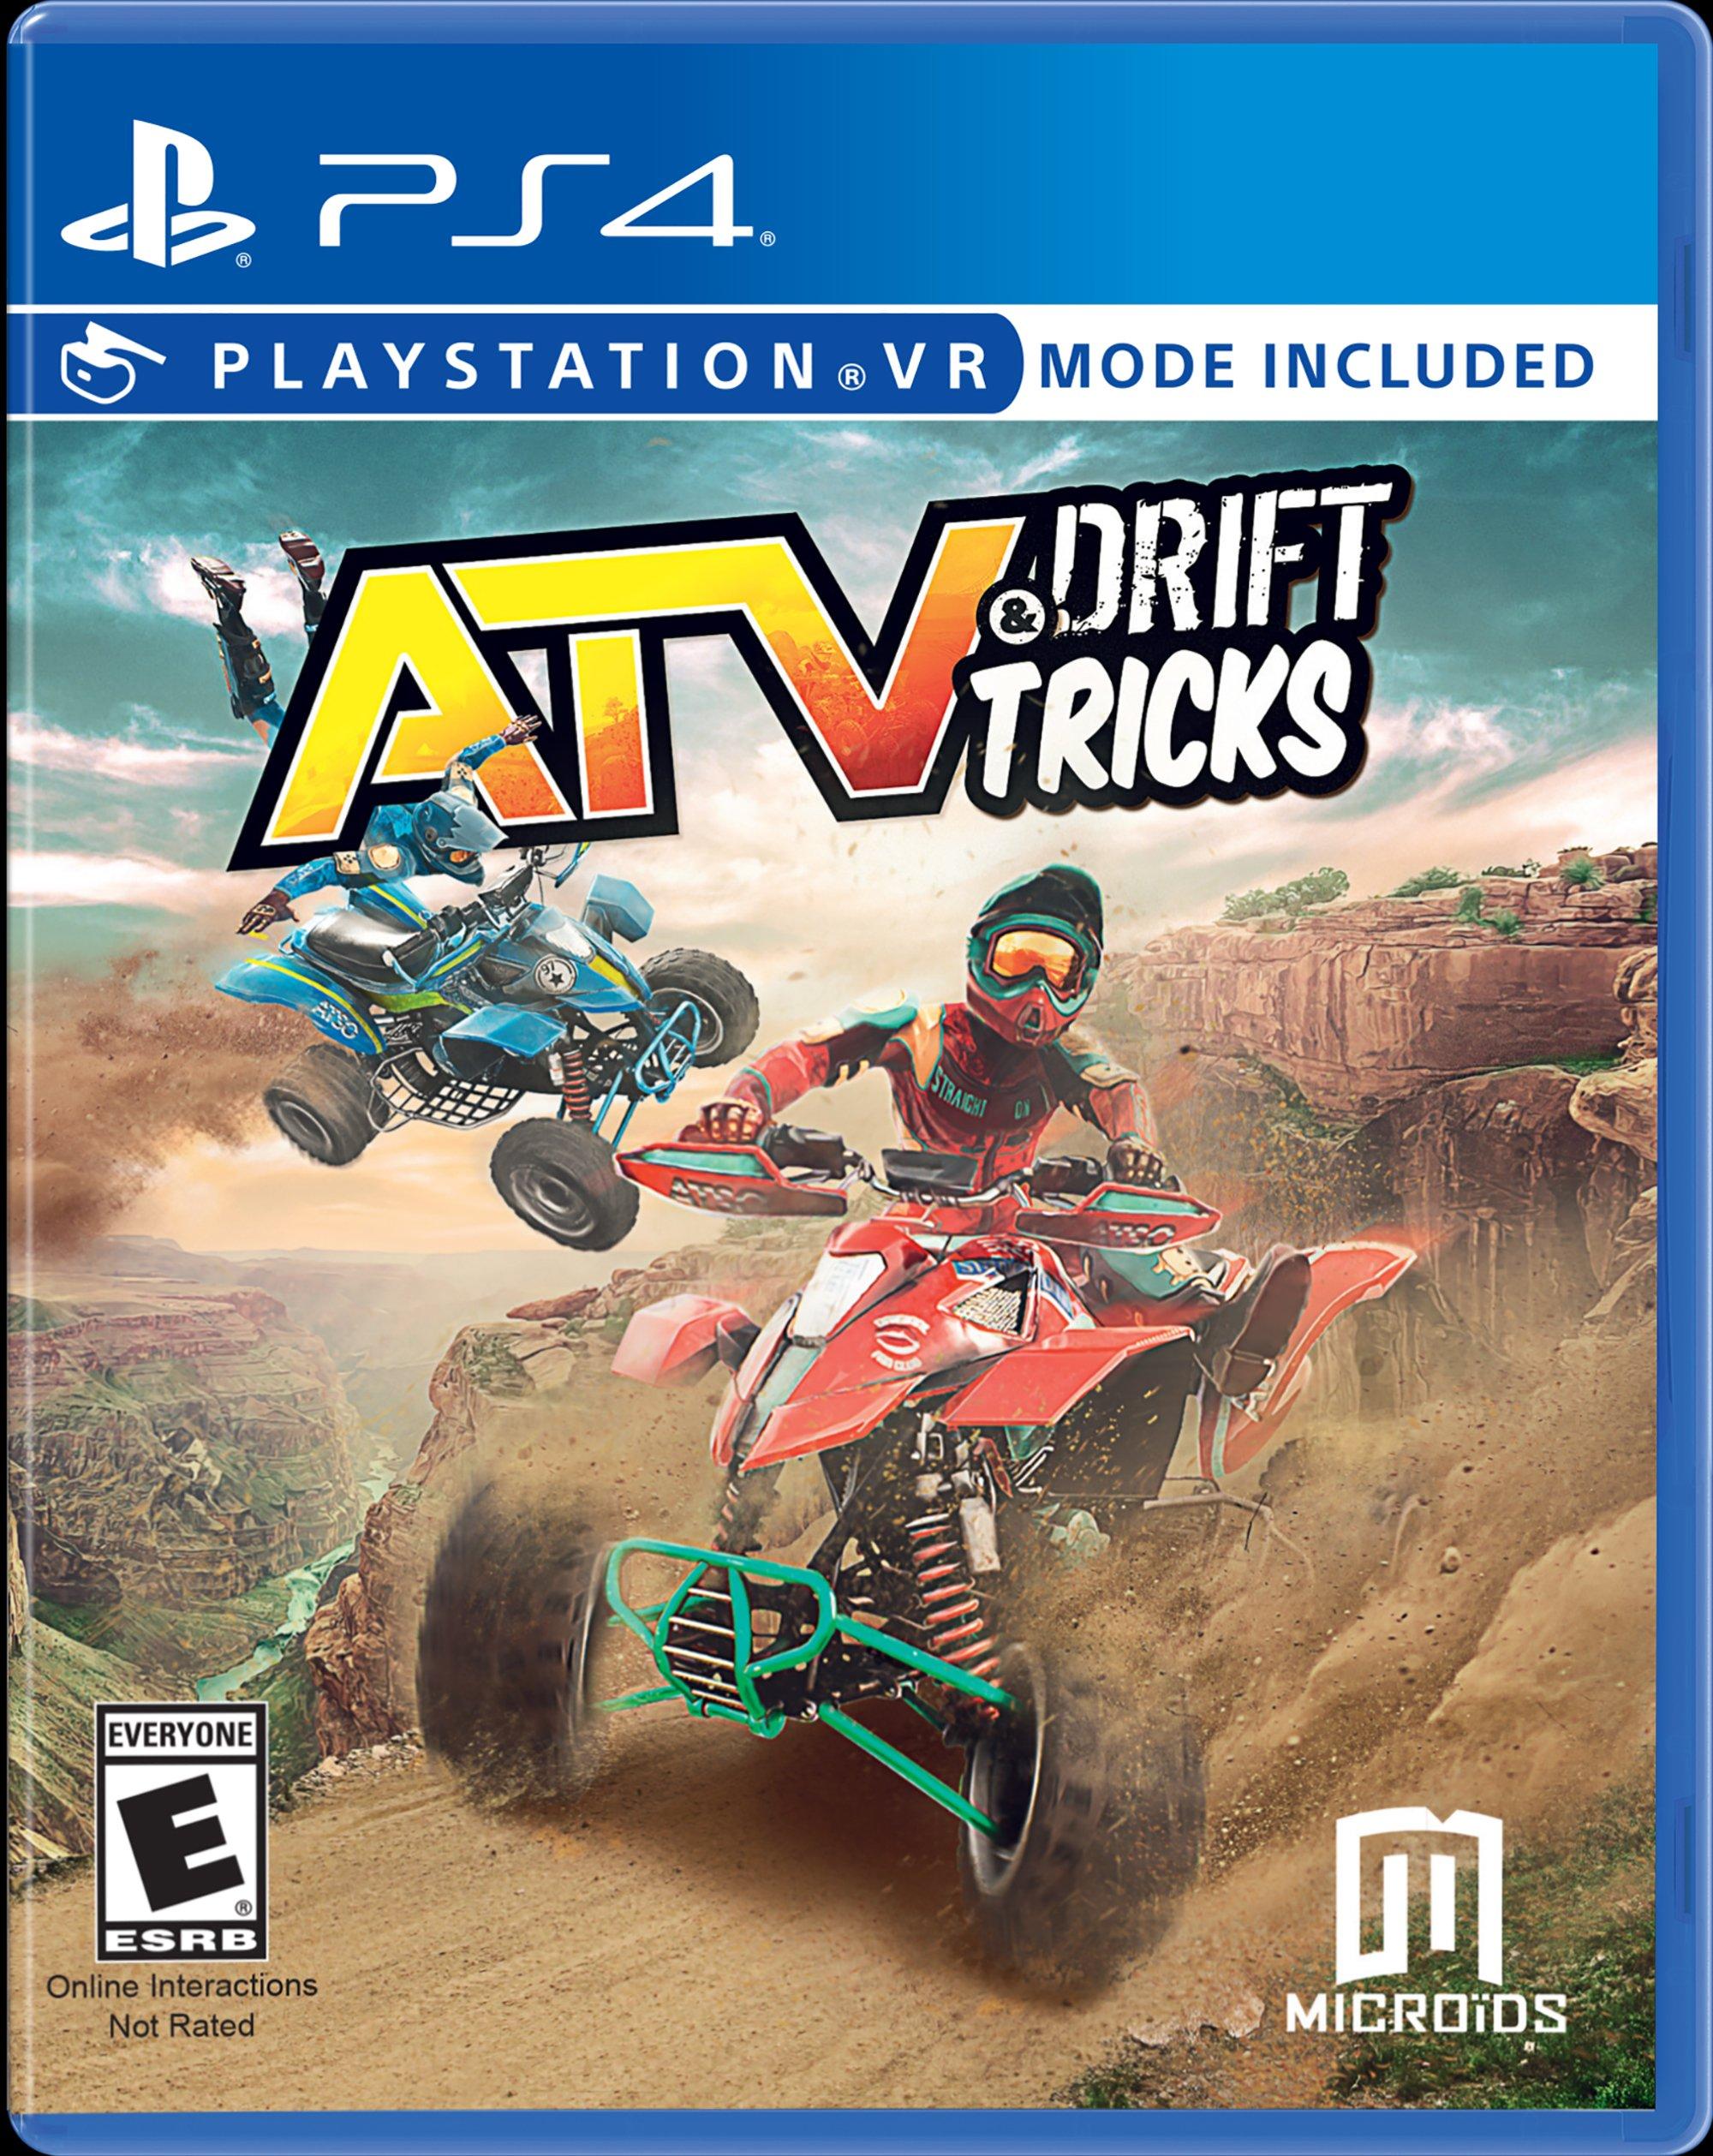 ATV Bike Games: Quad Offroad - Online Game - Play for Free